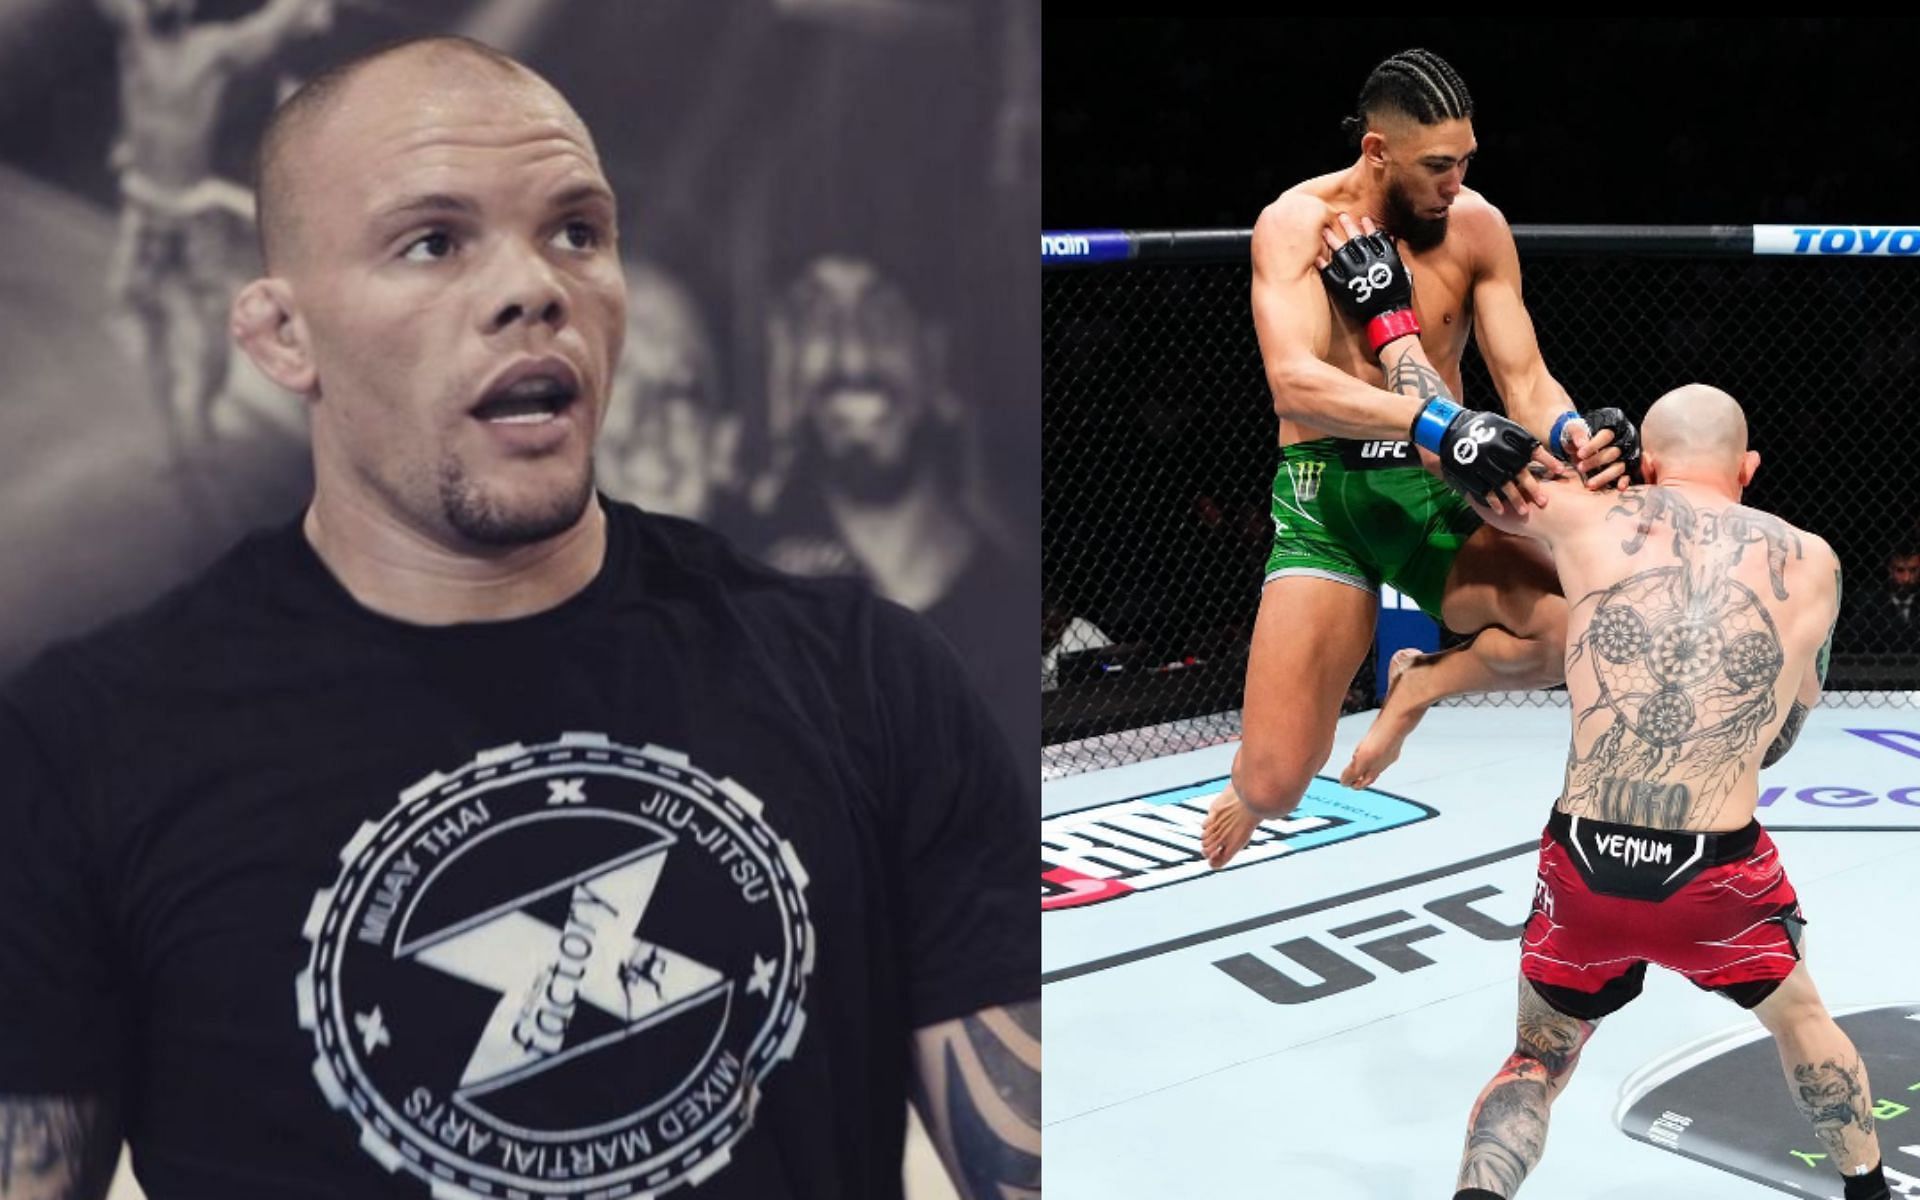 Anthony Smith congratulates Johnny Walker and issues quick statement [Images via: @ufc and @lionheartasmith on Instagram]